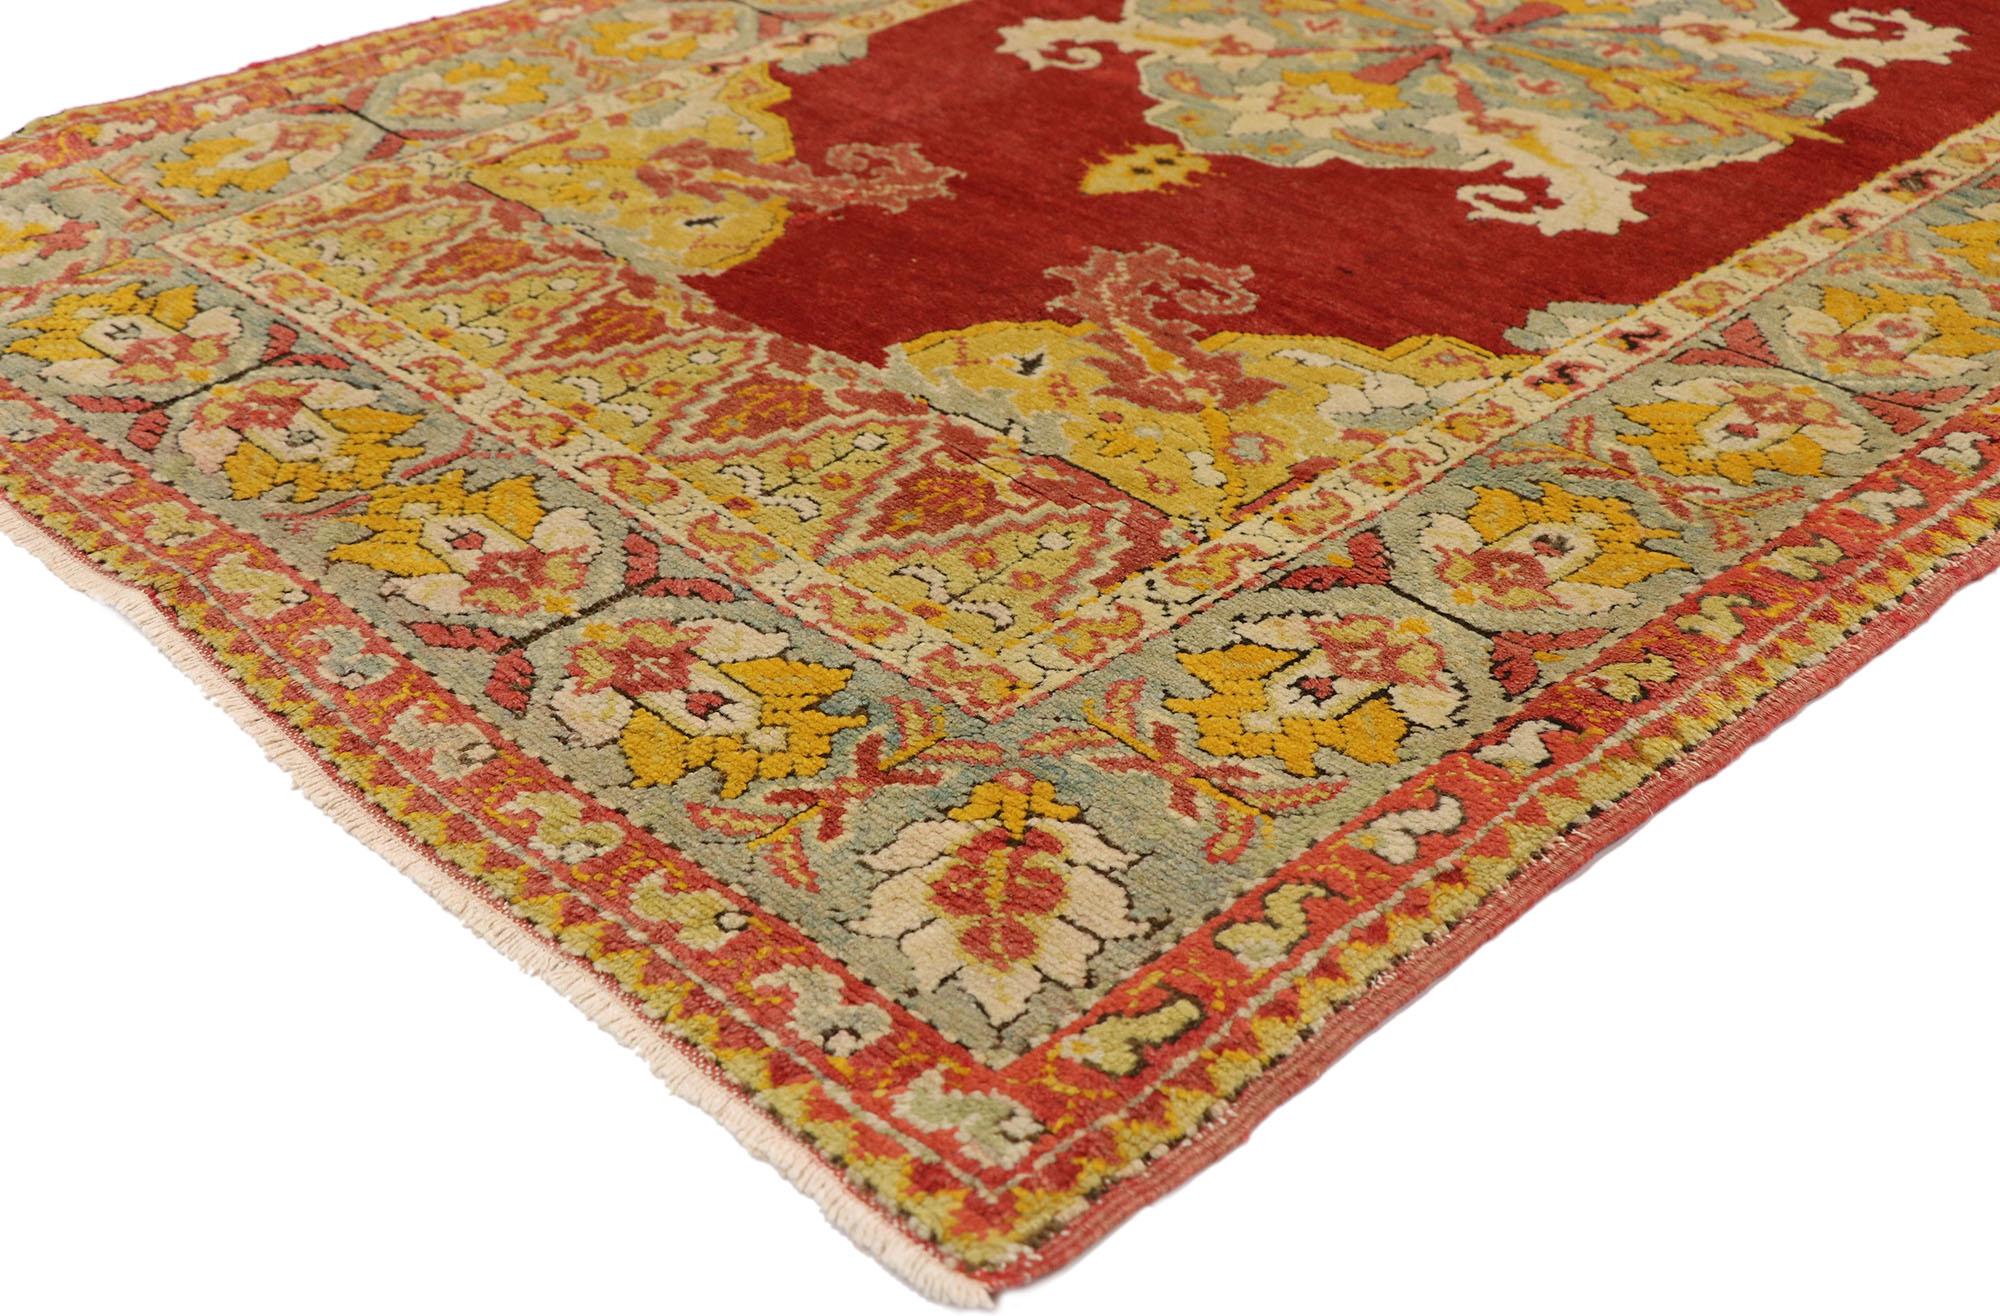 73867, antique Turkish Oushak rug with modern Spanish Jacobean style 03'03 x 06'00. With its striking appeal and saturated color palette, this hand knotted wool antique Turkish Oushak rug was inspired by the Folk Art of eastern Turkey. A vibrant